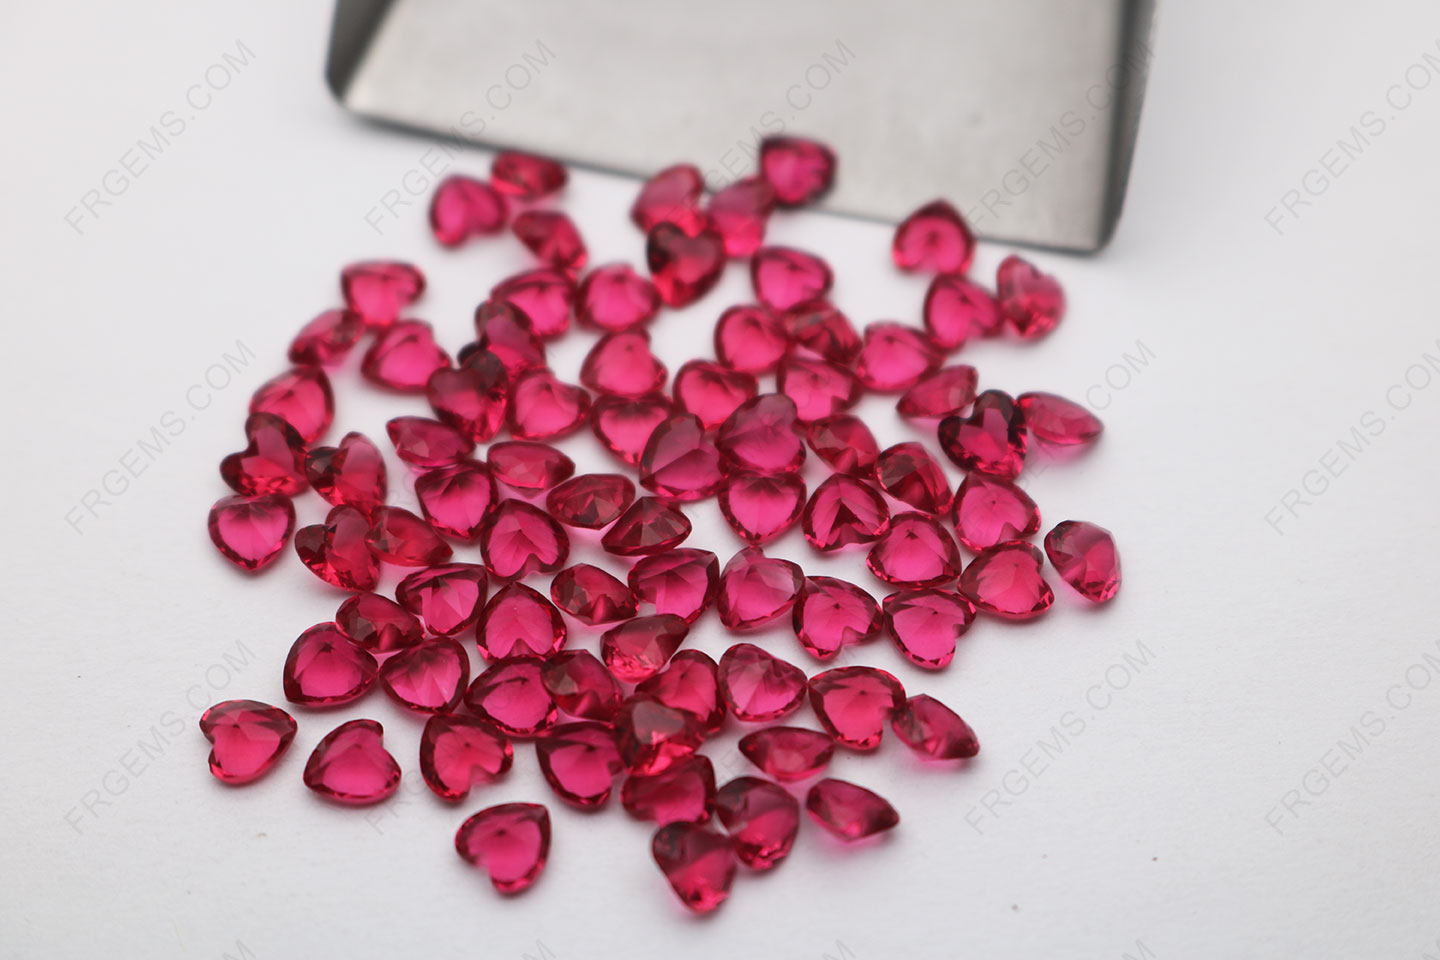 Glass Ruby Red BR502# Heart shape Faceted cut 5x5mm Loose gemstones Suppliers in China